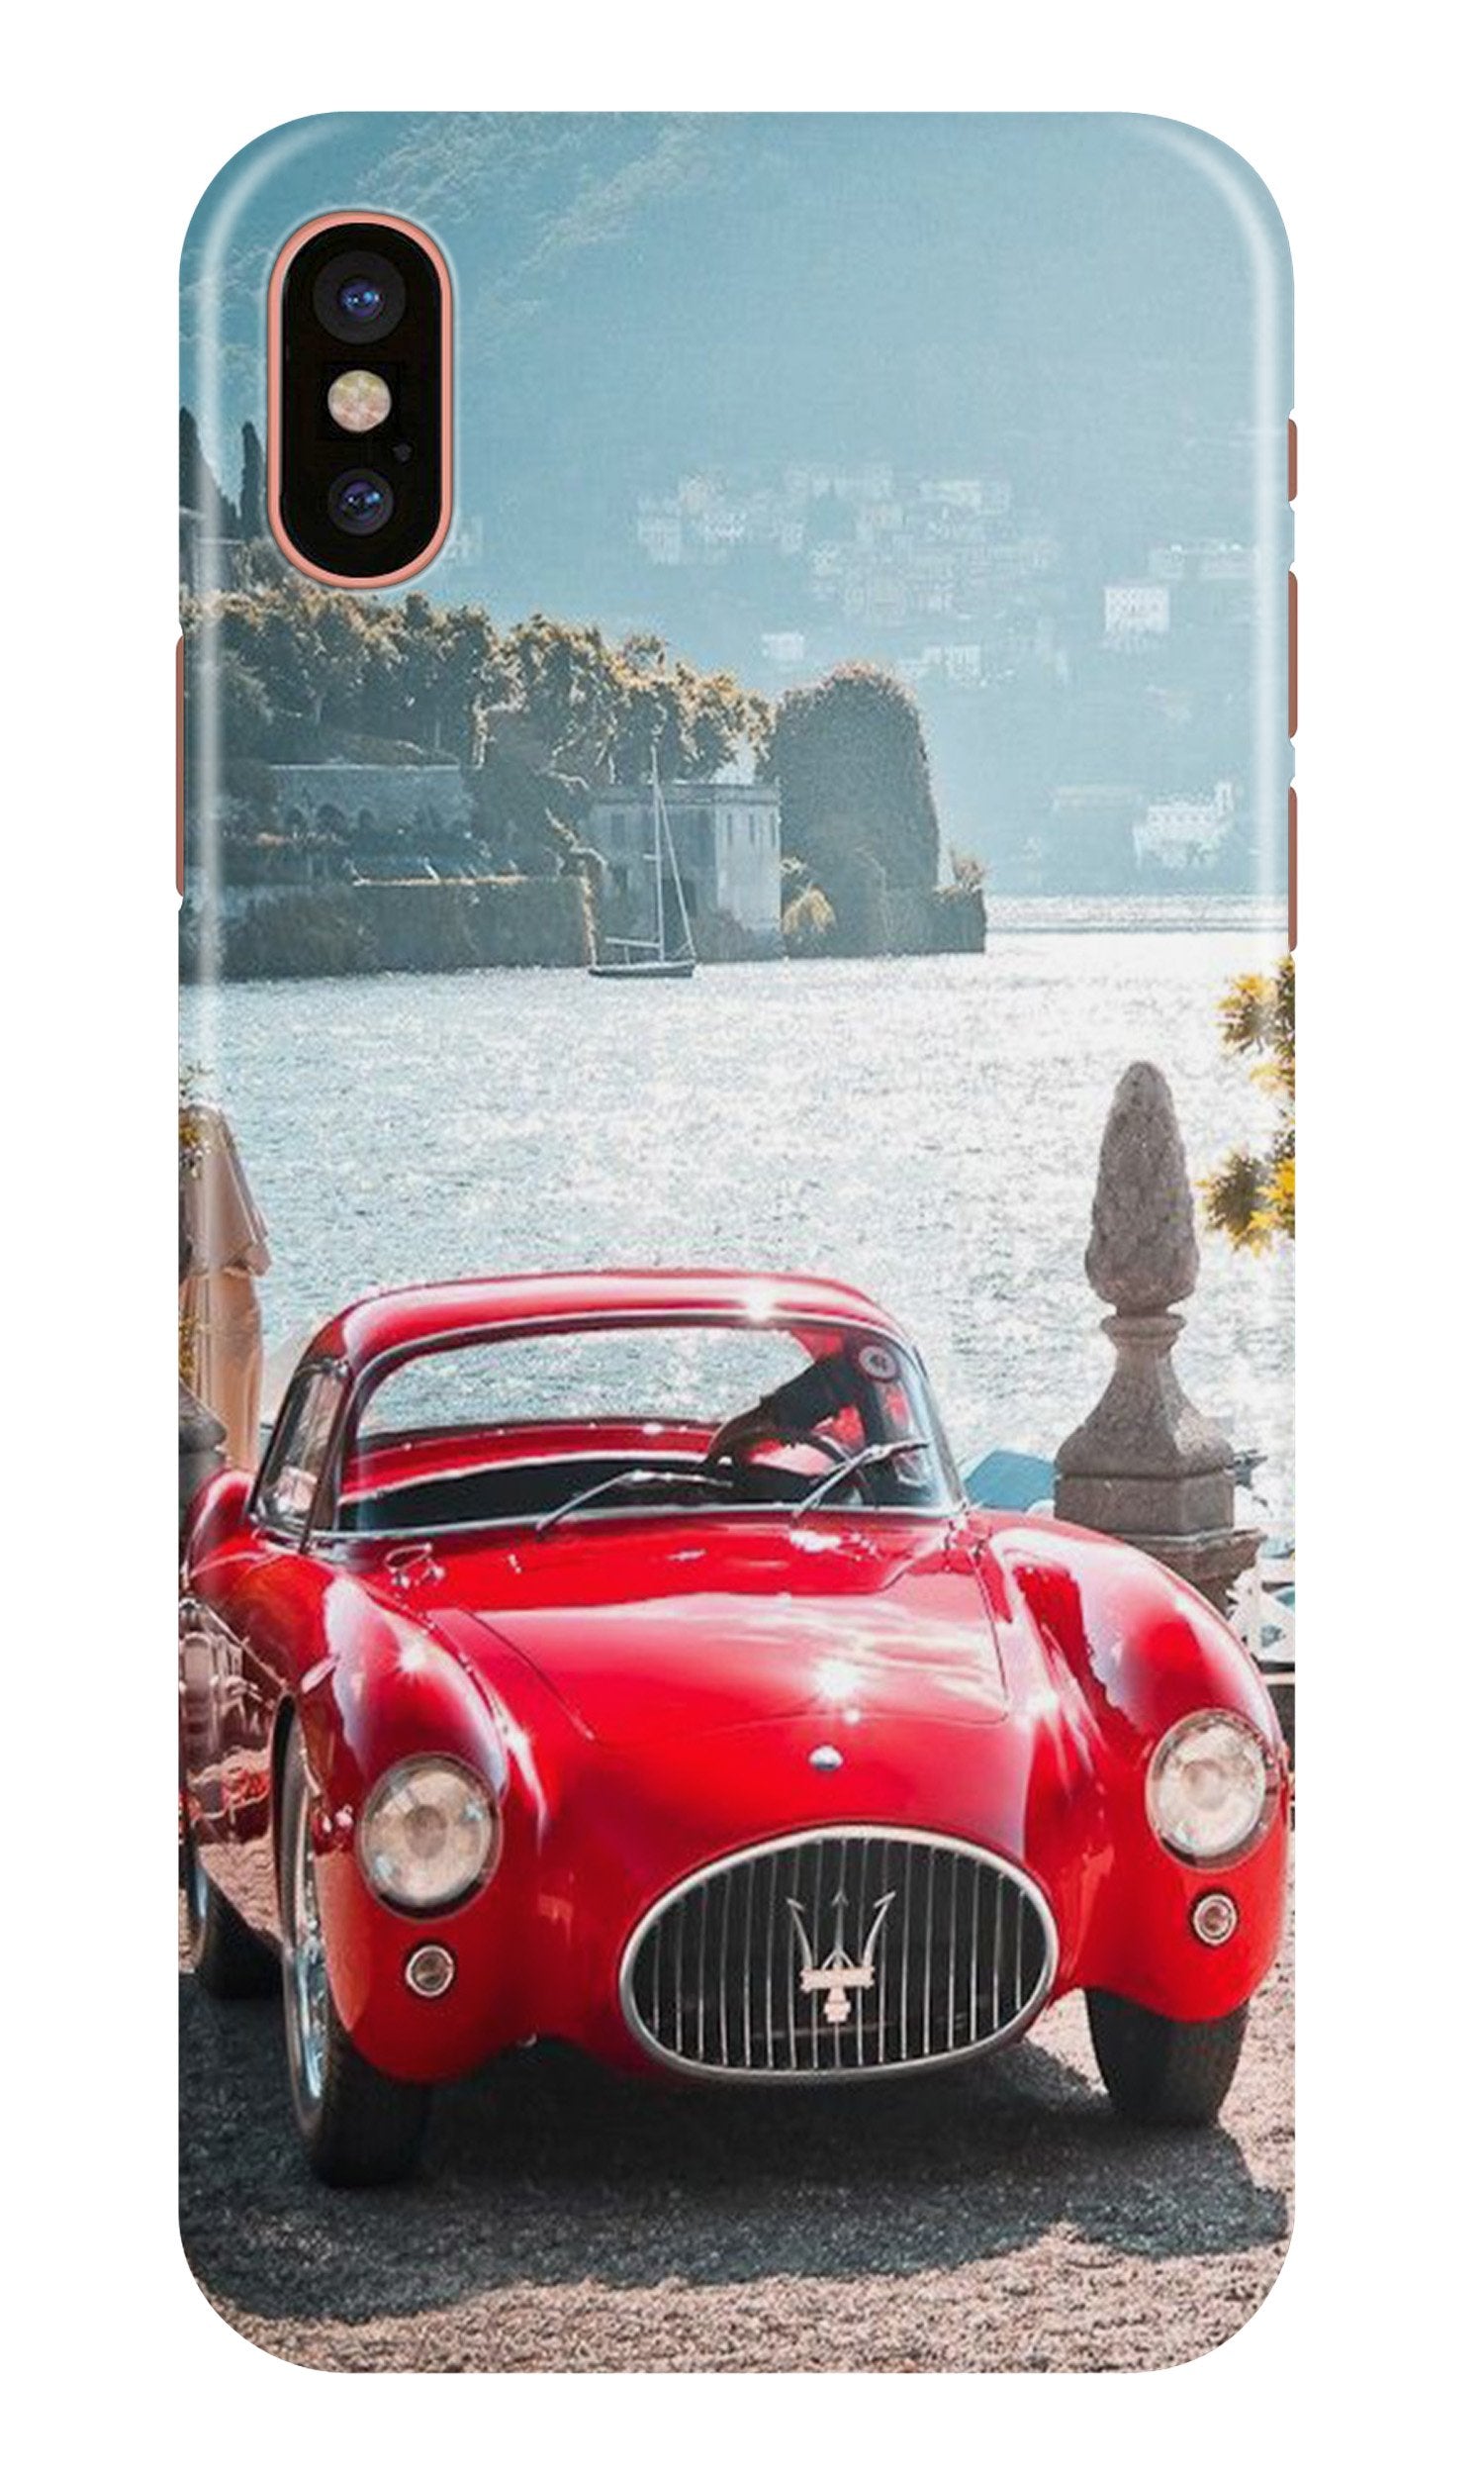 Vintage Car Case for iPhone X